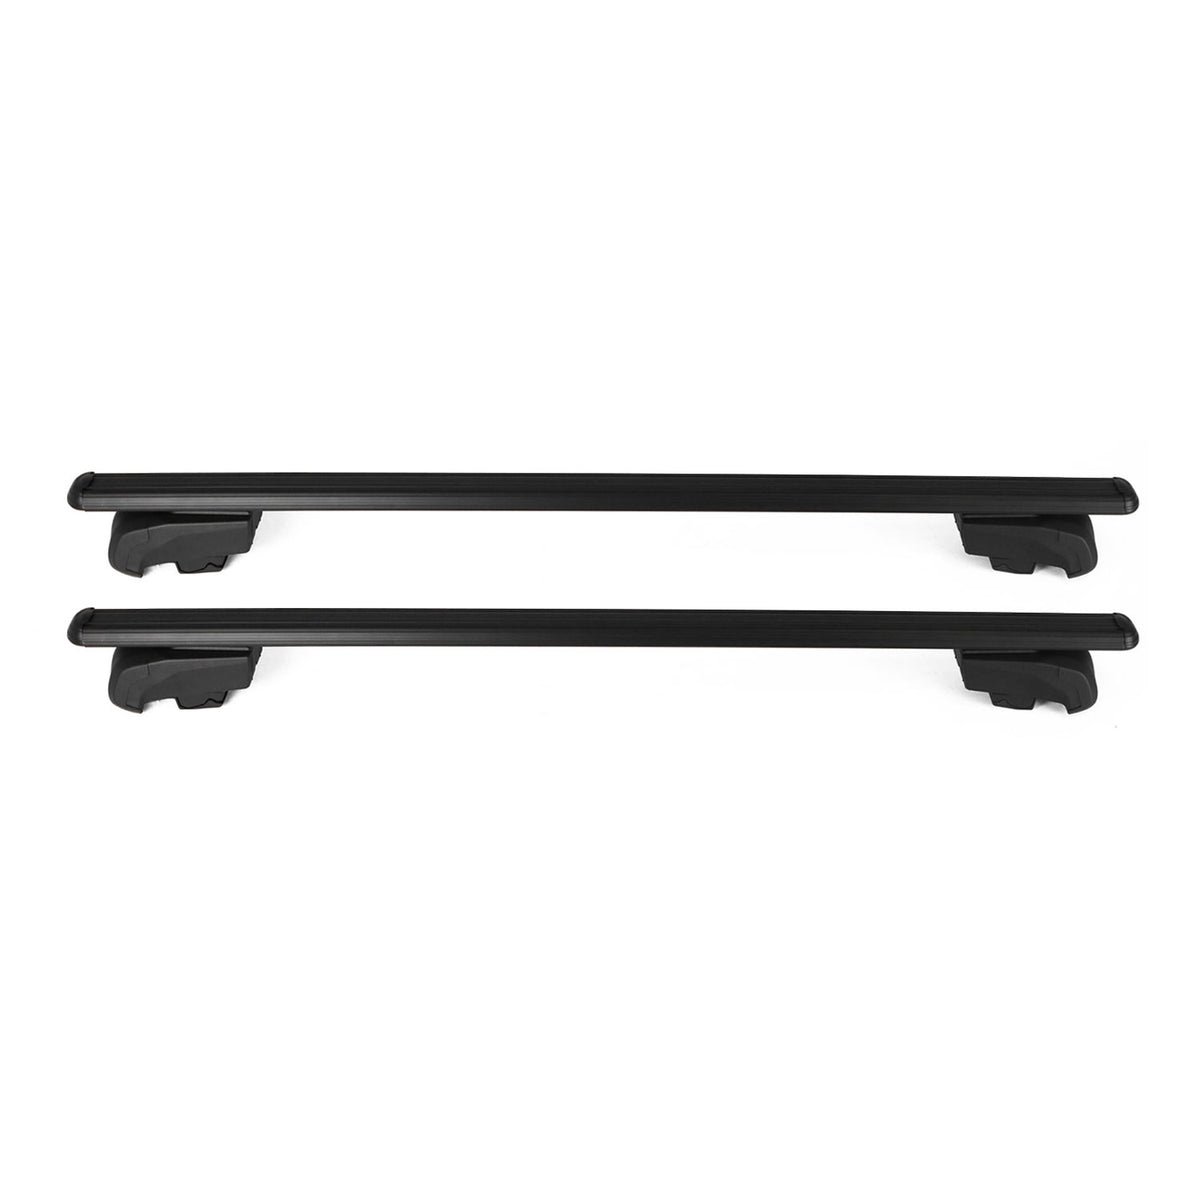 Roof rack luggage rack for Ford Mondeo 2014-2020 TÜV ABE aluminum black 2x